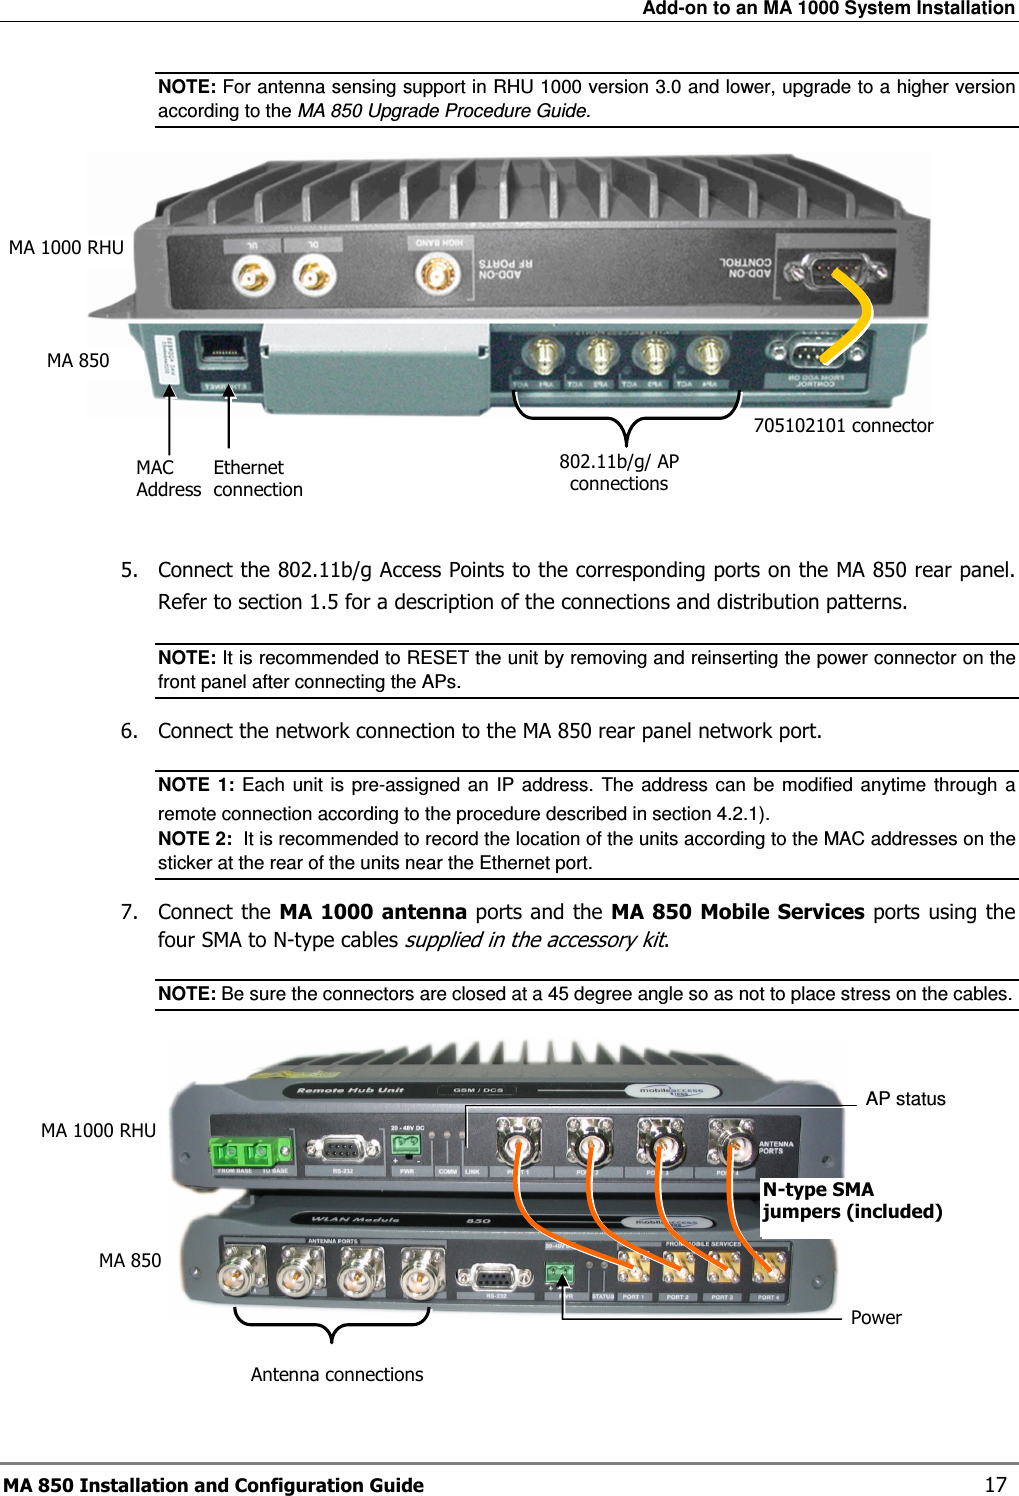 Add-on to an MA 1000 System Installation MA 850 Installation and Configuration Guide    17 NOTE: For antenna sensing support in RHU 1000 version 3.0 and lower, upgrade to a higher version  according to the MA 850 Upgrade Procedure Guide.     5.  Connect the 802.11b/g Access Points to the corresponding ports on the MA 850 rear panel. Refer to section  1.5 for a description of the connections and distribution patterns. NOTE: It is recommended to RESET the unit by removing and reinserting the power connector on the front panel after connecting the APs.  6.  Connect the network connection to the MA 850 rear panel network port. NOTE  1:  Each  unit is  pre-assigned an  IP  address.  The address  can  be  modified  anytime  through  a remote connection according to the procedure described in section  4.2.1).   NOTE 2:  It is recommended to record the location of the units according to the MAC addresses on the sticker at the rear of the units near the Ethernet port. 7.  Connect the MA 1000 antenna ports and the  MA  850 Mobile Services ports using the four SMA to N-type cables supplied in the accessory kit. NOTE: Be sure the connectors are closed at a 45 degree angle so as not to place stress on the cables.    AP status MA 850 MA 1000 RHU Power Antenna connections N-type SMA jumpers (included) 802.11b/g/ AP connections 705102101 connector Ethernet connection MAC  Address MA 1000 RHU MA 850 